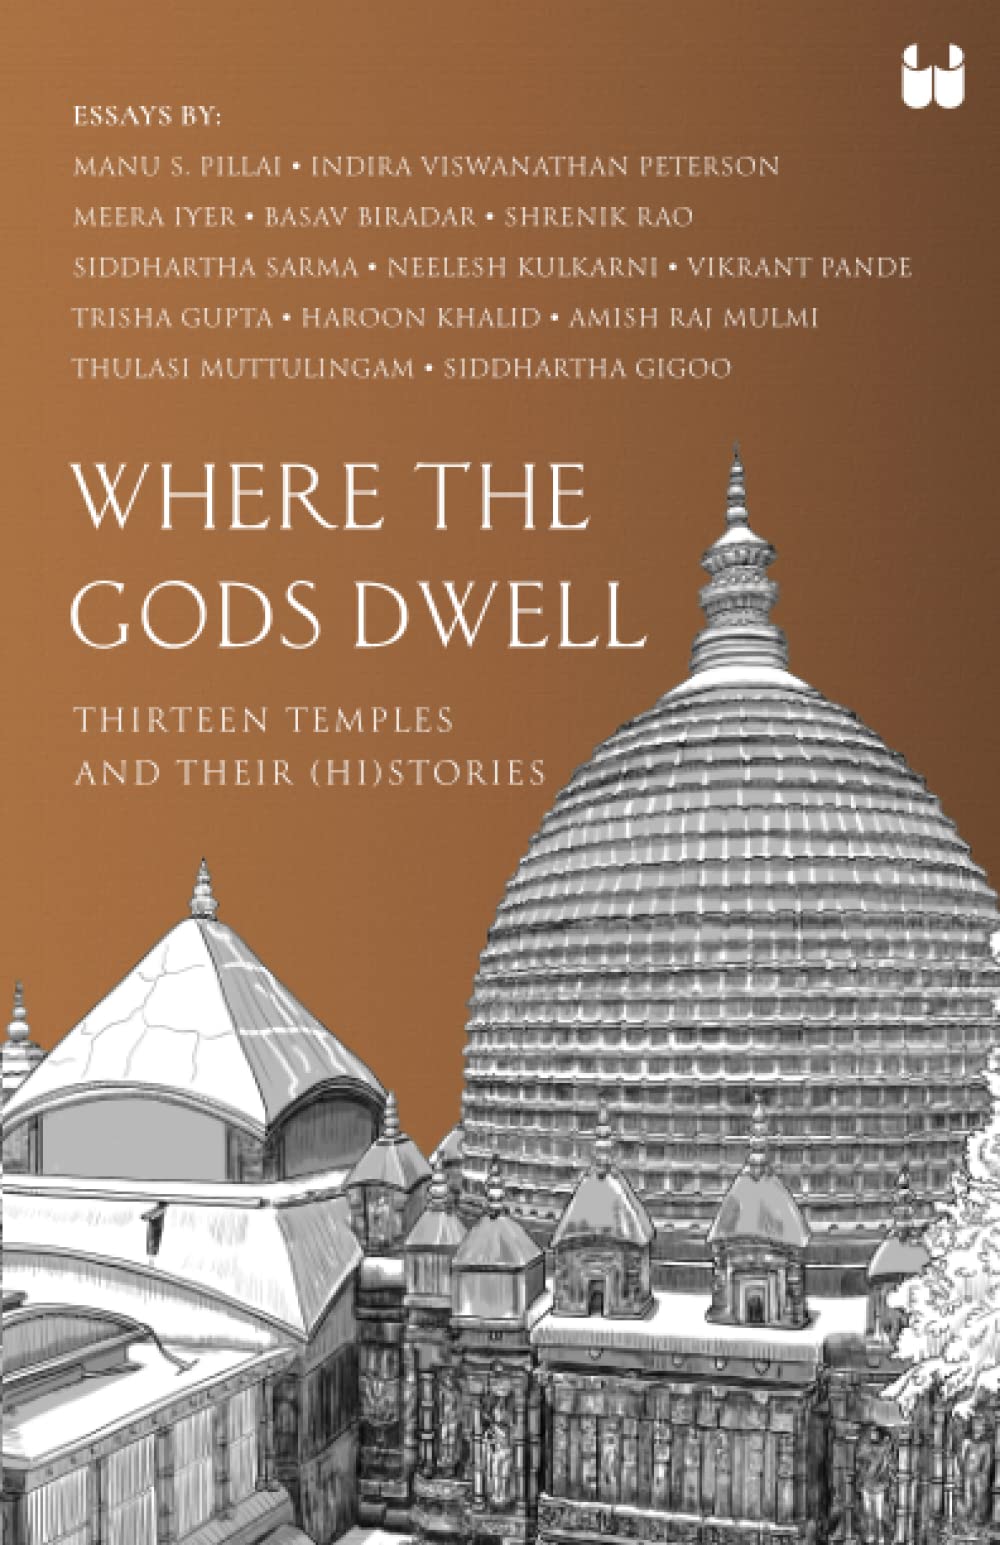 Where The Gods Dwell: Thirteen Temples And Their (HI)Stories